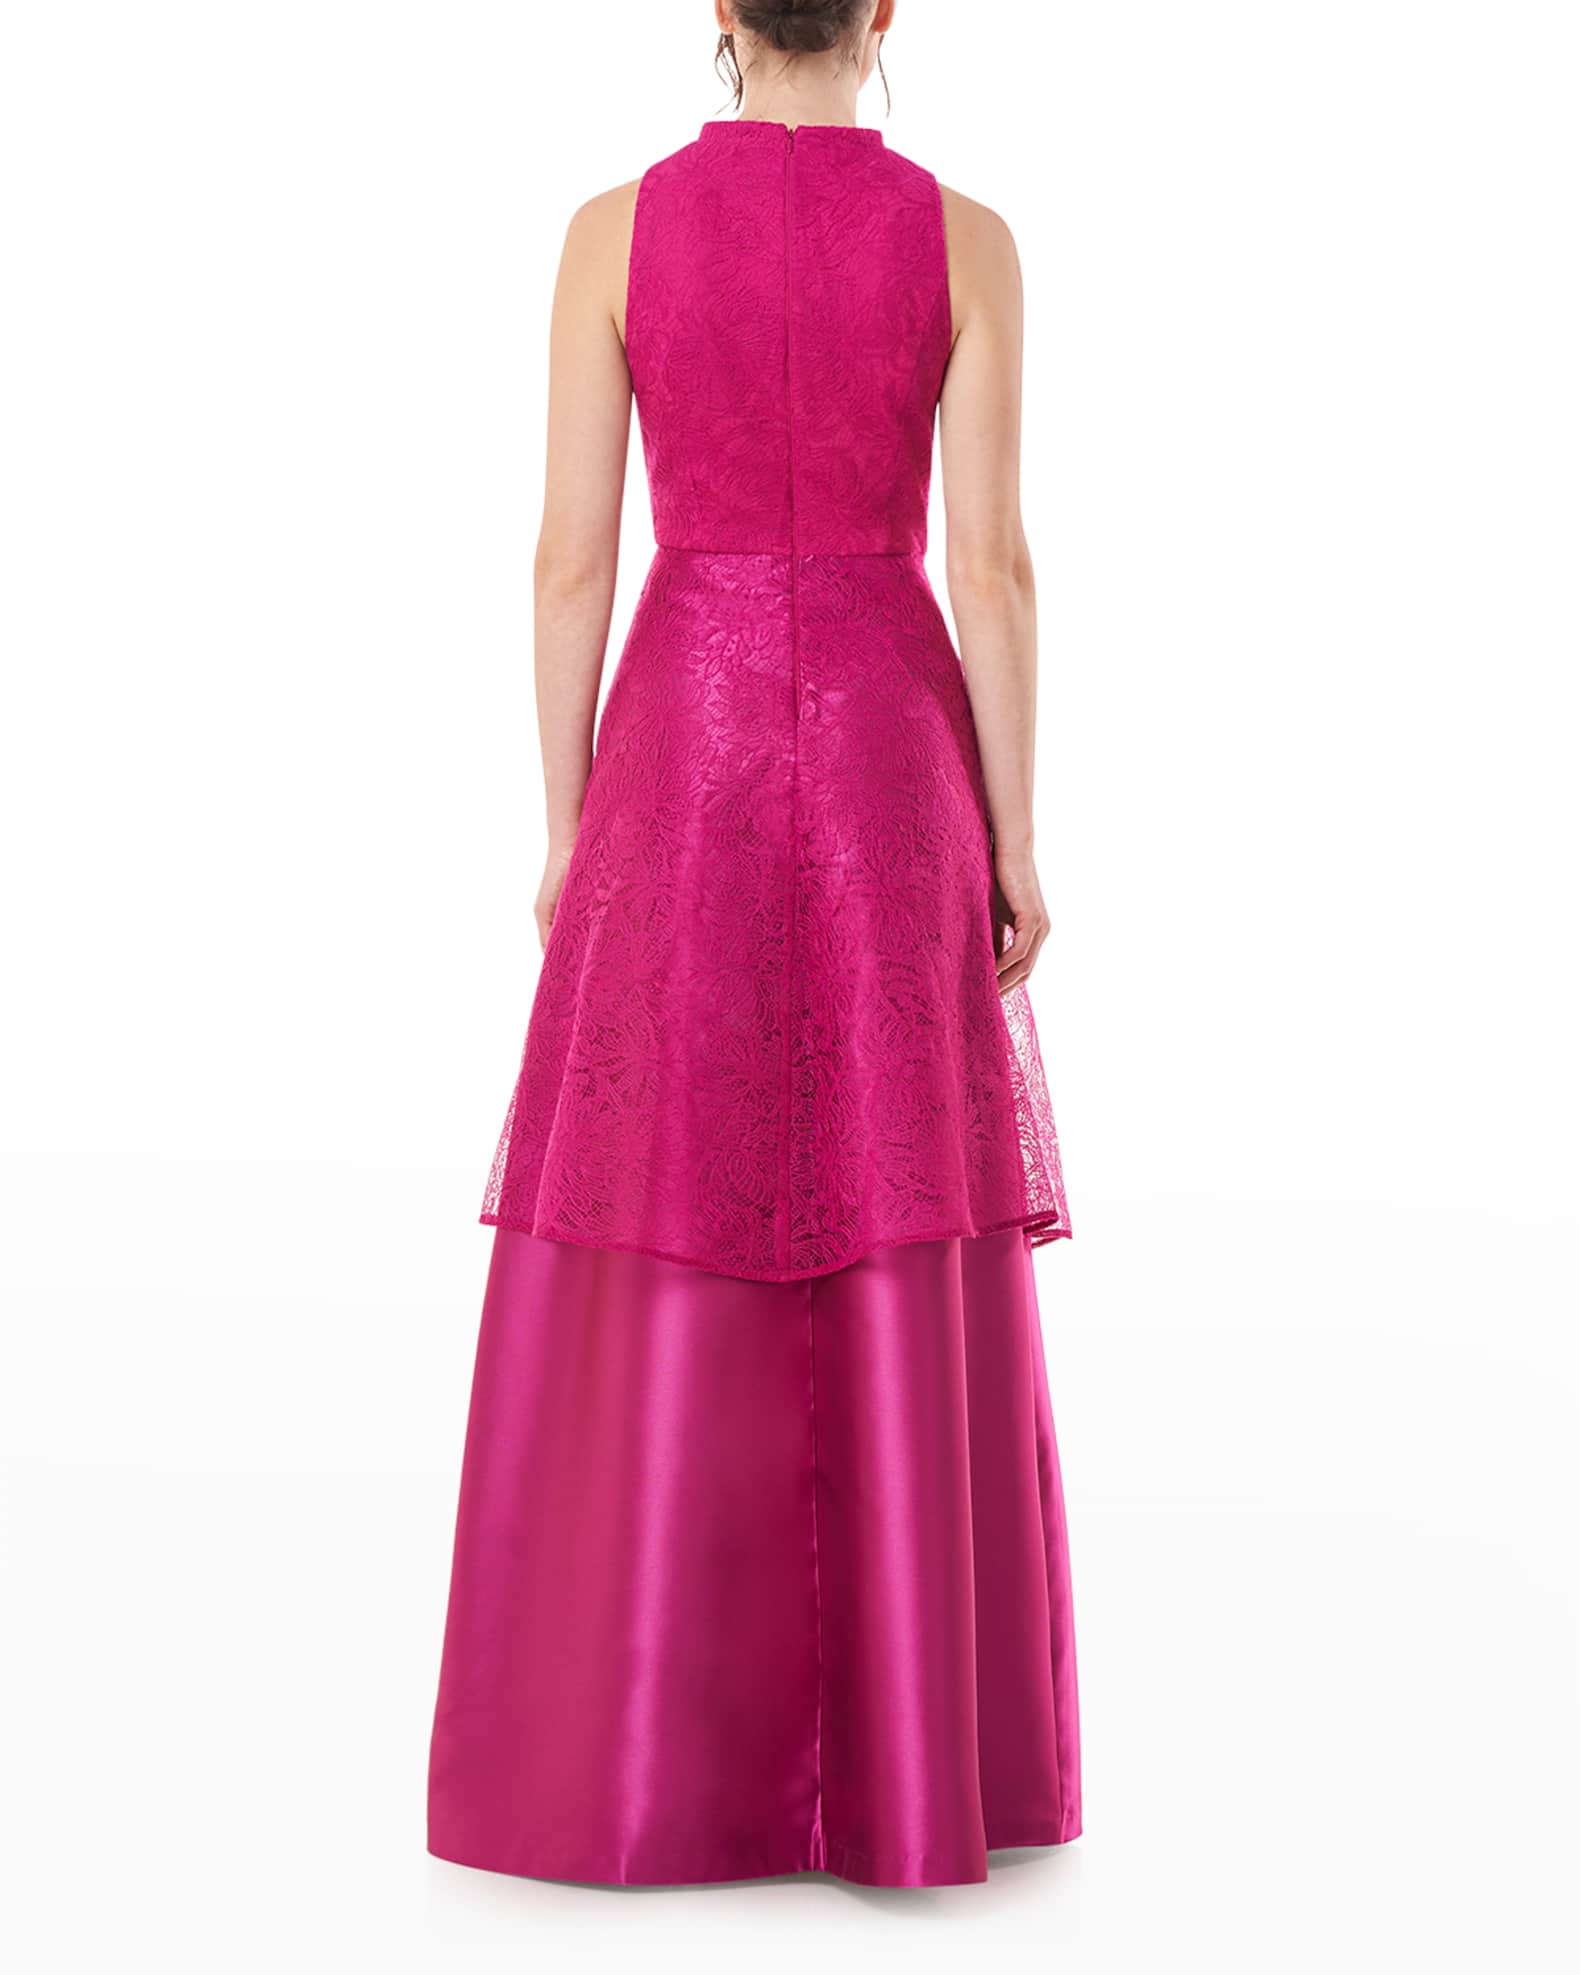 Kay Unger New York Pleated Lace Overlay Gown | Neiman Marcus